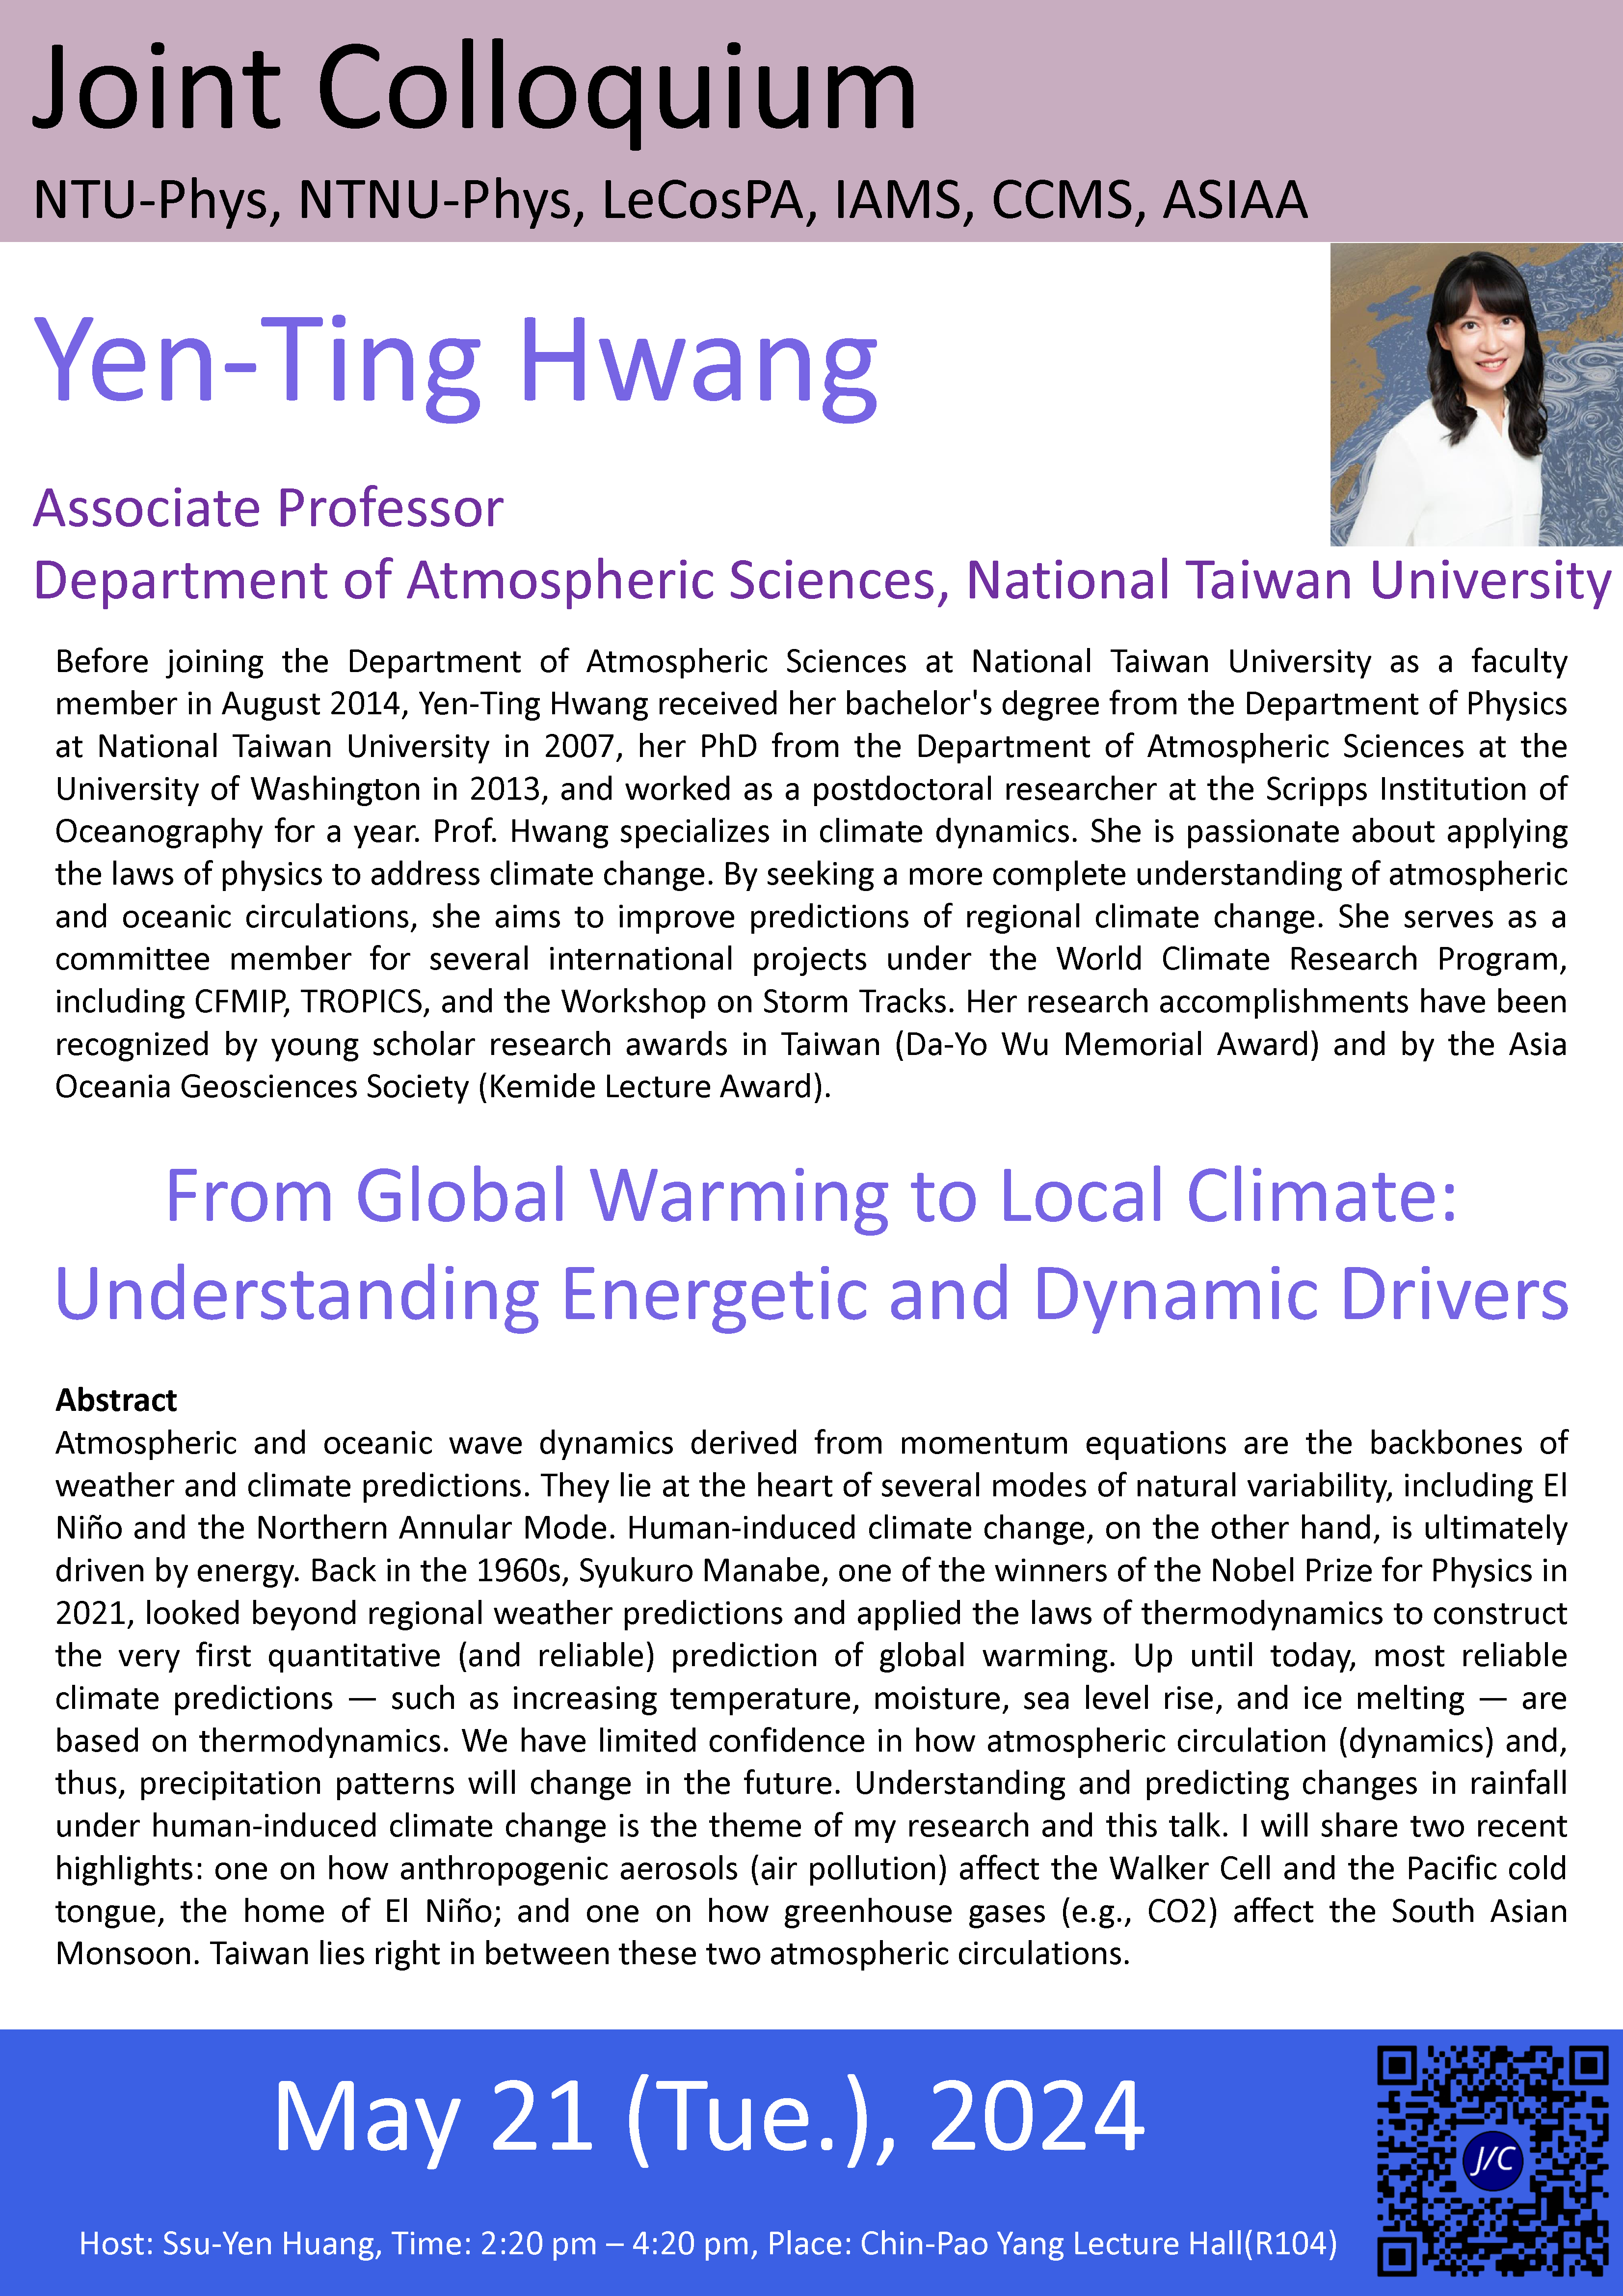 From Global Warming to Local Climate: Understanding Energetic and Dynamic Drivers